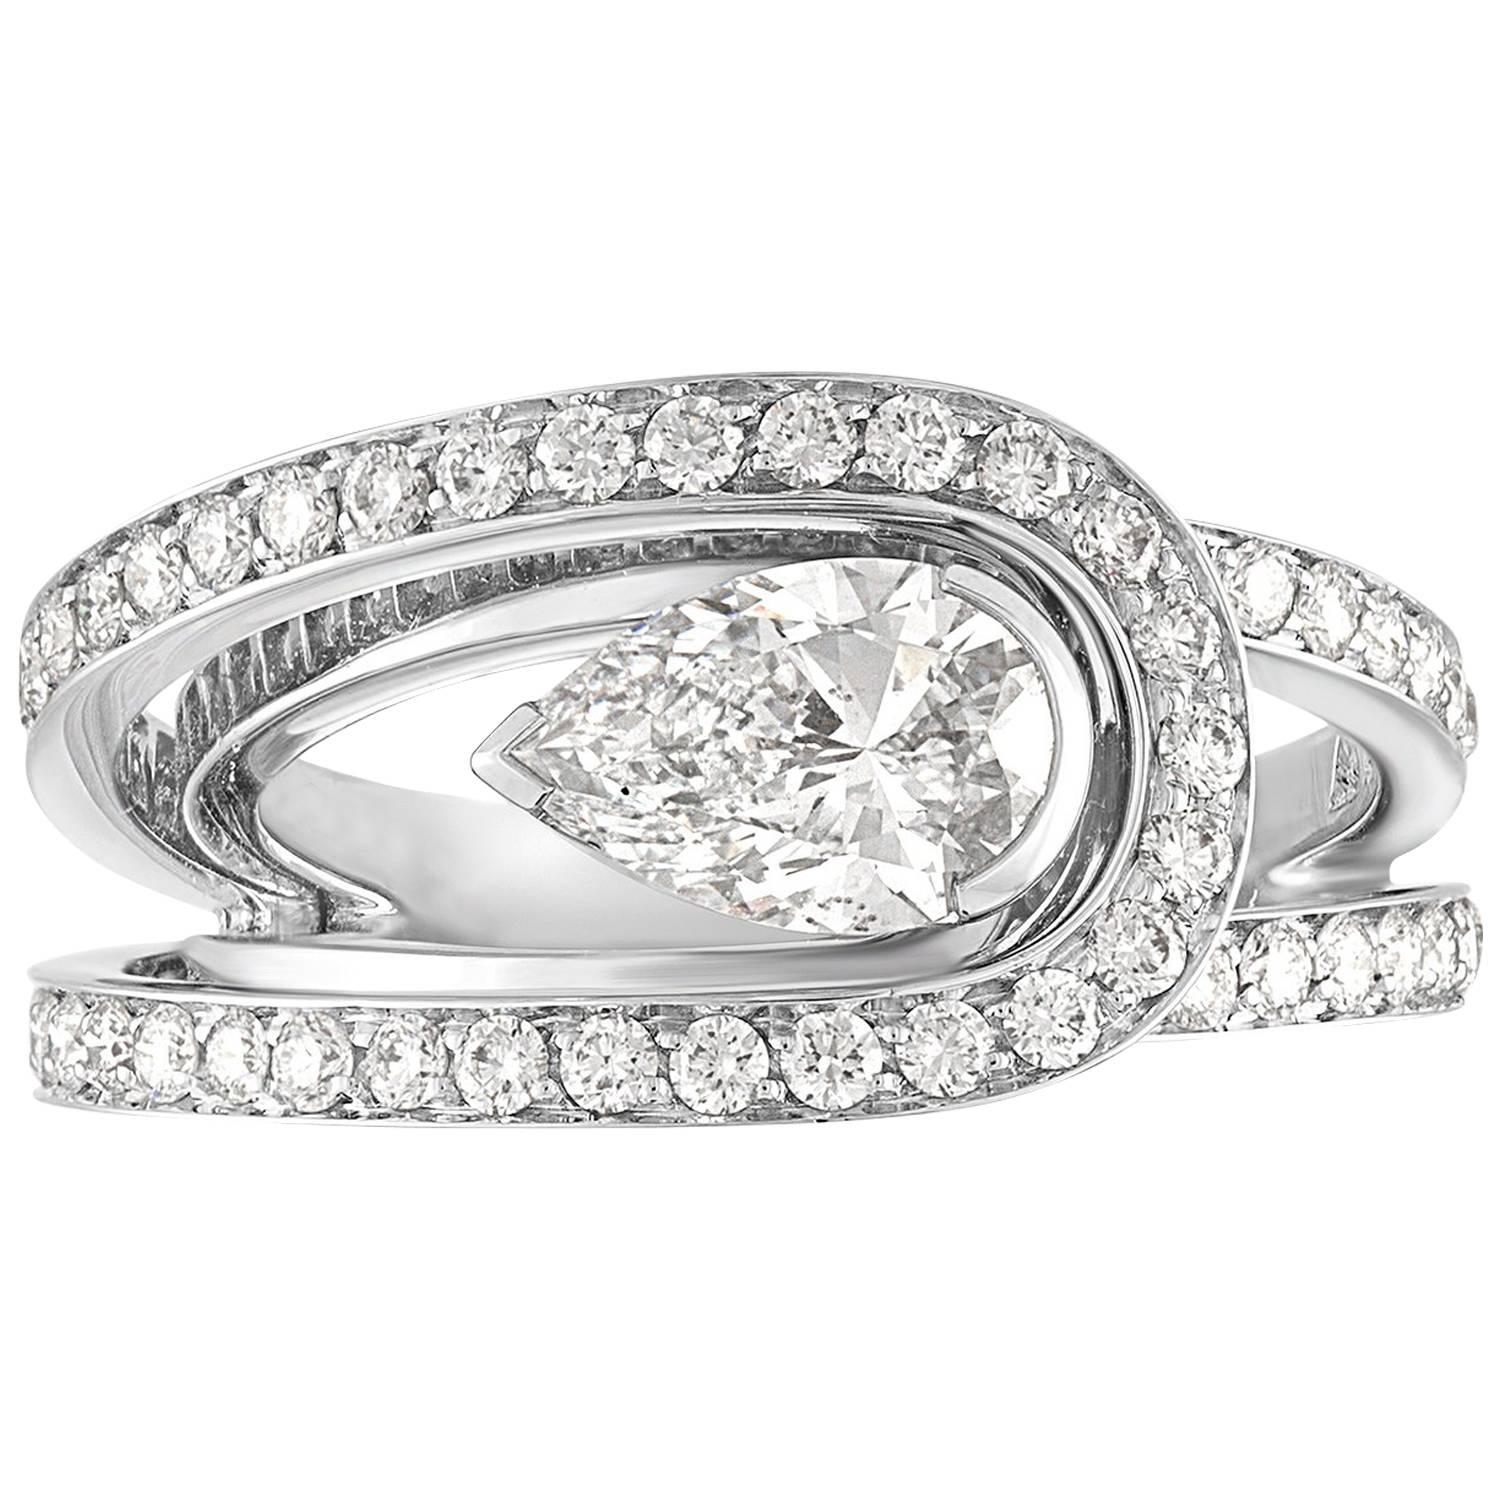 Fred of Paris GIA Certified 1.01 Carats F VS2 Diamond Platinum Lovelight Ring For Sale